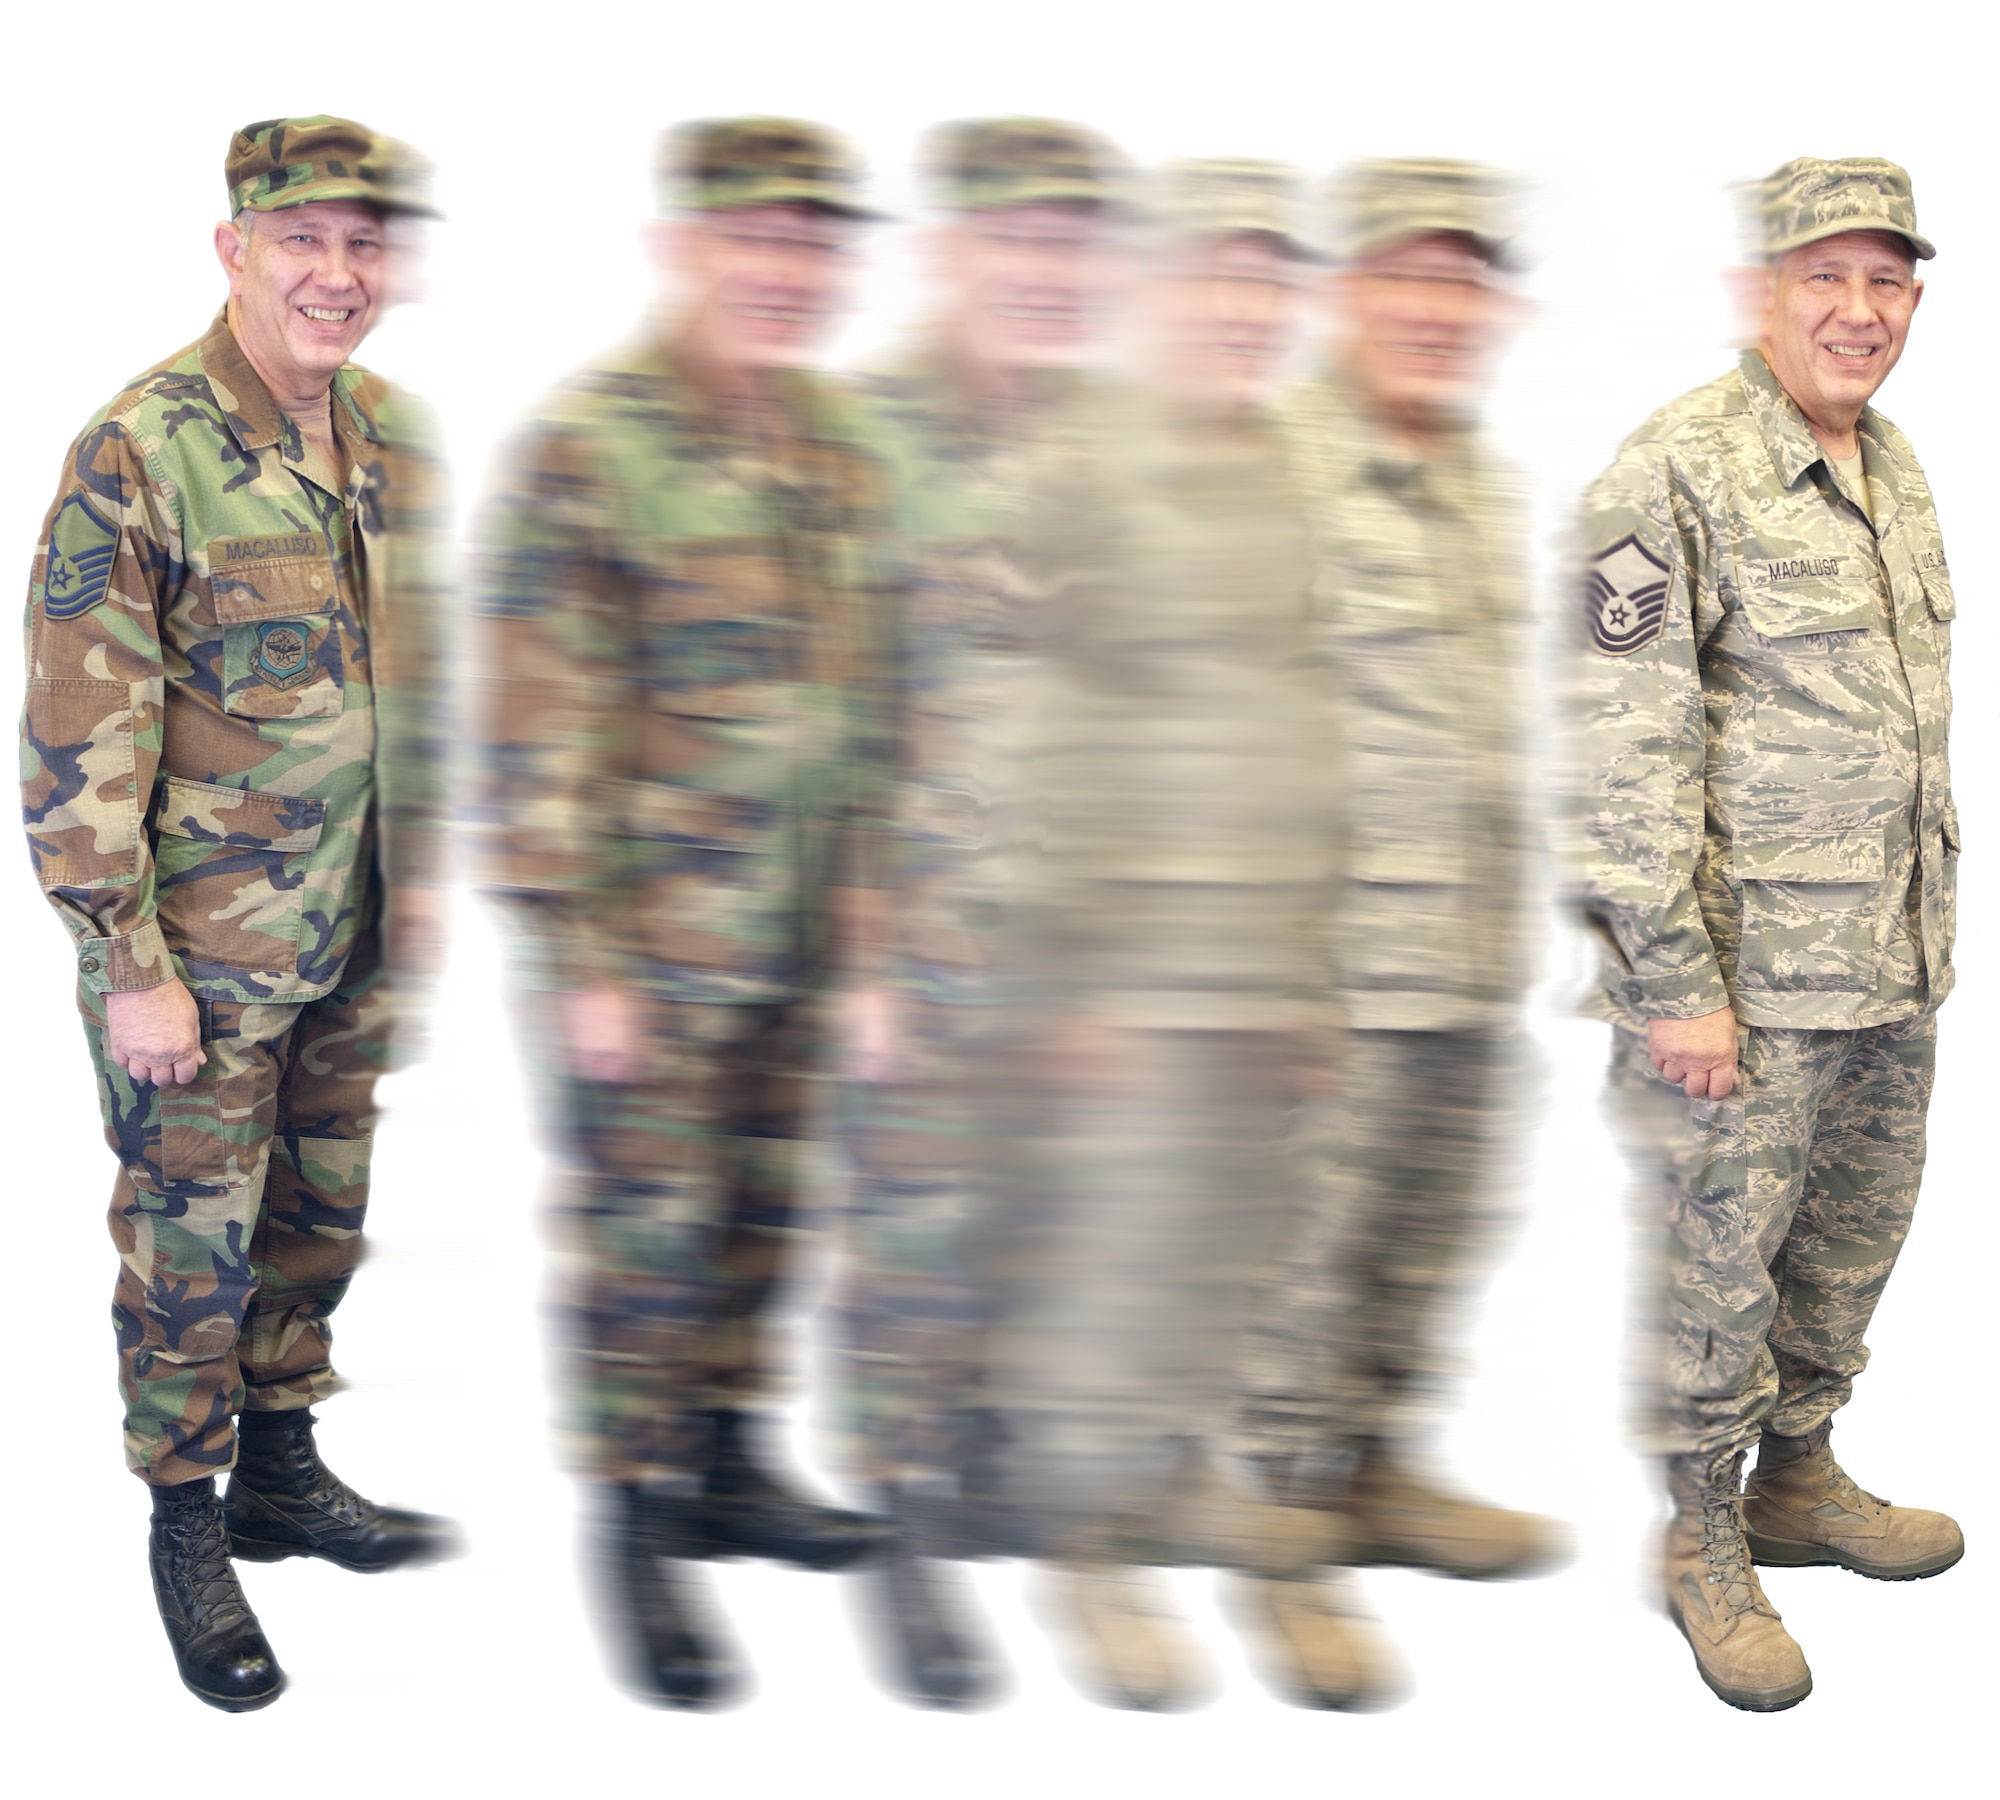 In 2006, the Airman Battle Uniform became authorized for wear and a date was set for final phase-out of the woodland camouflage-patterned BDU’s. Previously announced to be effective Oct. 1 of this year, a more recent Air Force Instruction 36-2903 pushed the date back to Nov. 1. This applies to all Air Force components – active duty, Guard and Reserve. (Nevada National Guard photo illustration.)